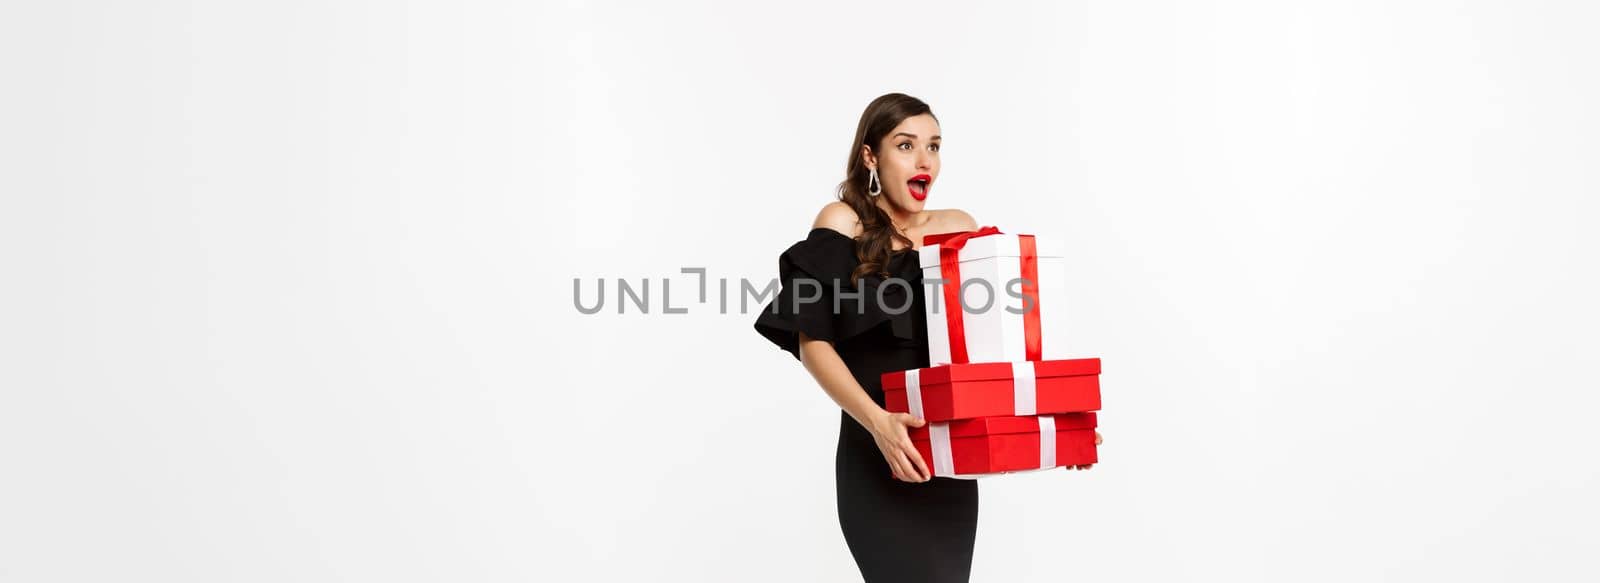 Merry christmas and new year holidays concept. Excited and happy woman in black dress holding xmas presents, looking surprised at logo. standing with presents against white background by Benzoix